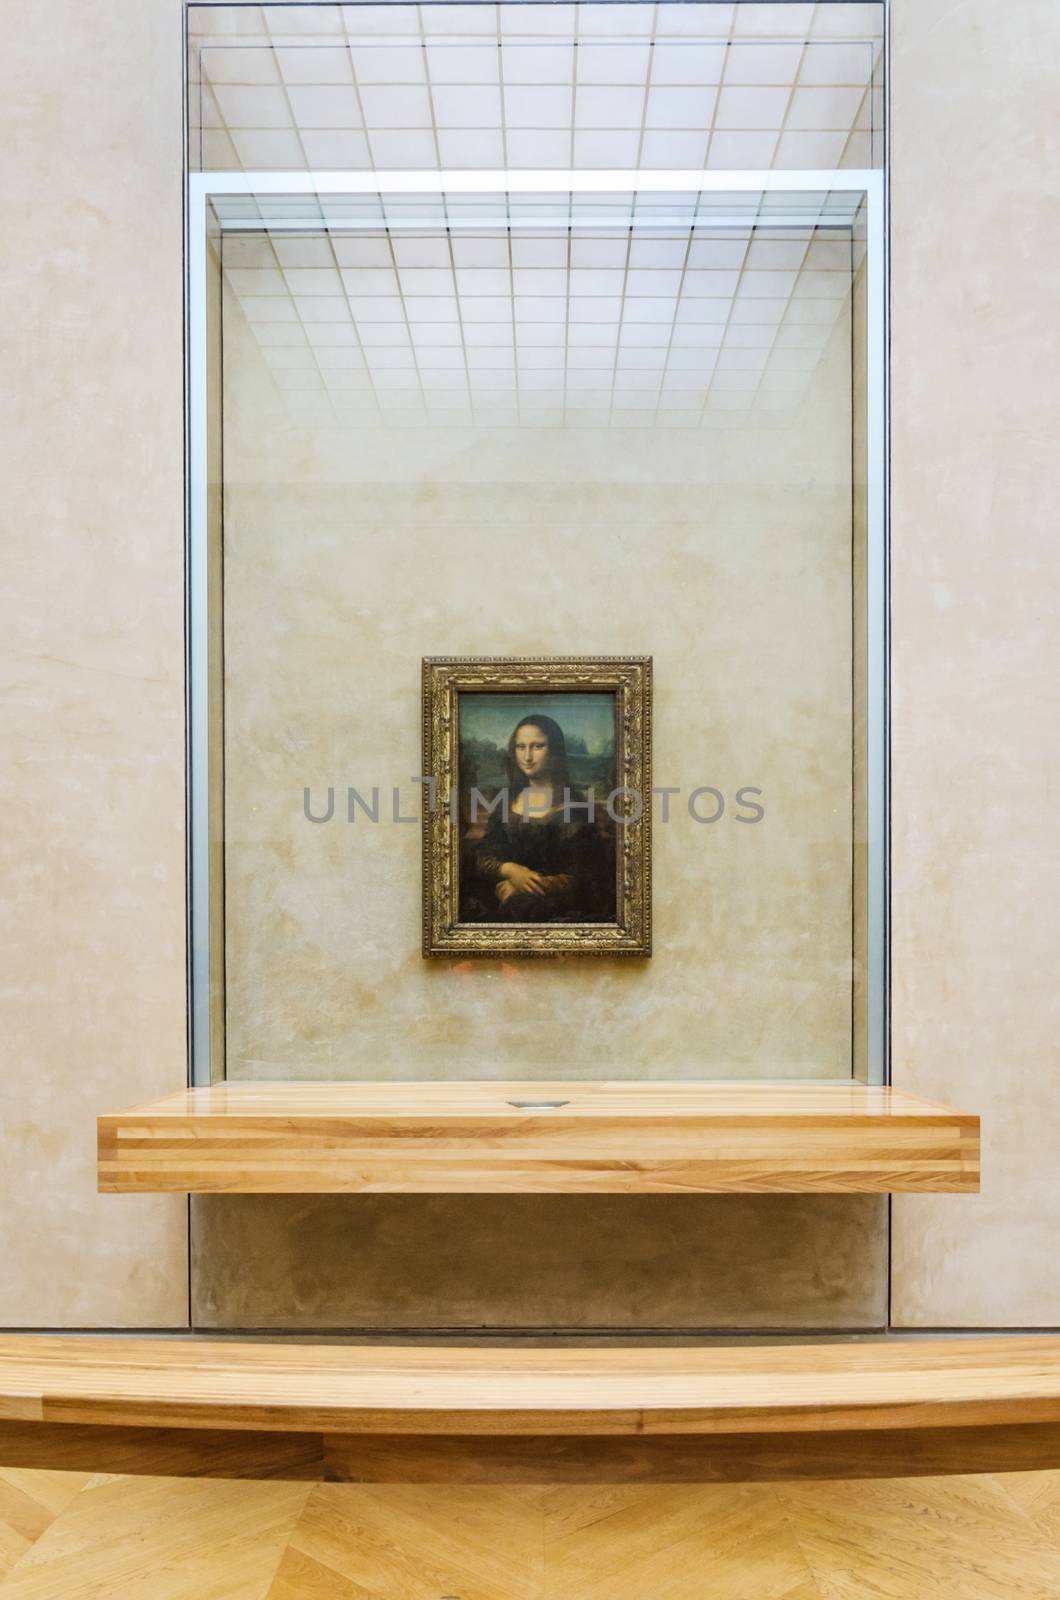 Paris, France - May 13, 2015: Leonardo DaVinci's "Mona Lisa" at the Louvre Museum, May 13, 2015 in Paris, France. The painting is one of the world's most famous.